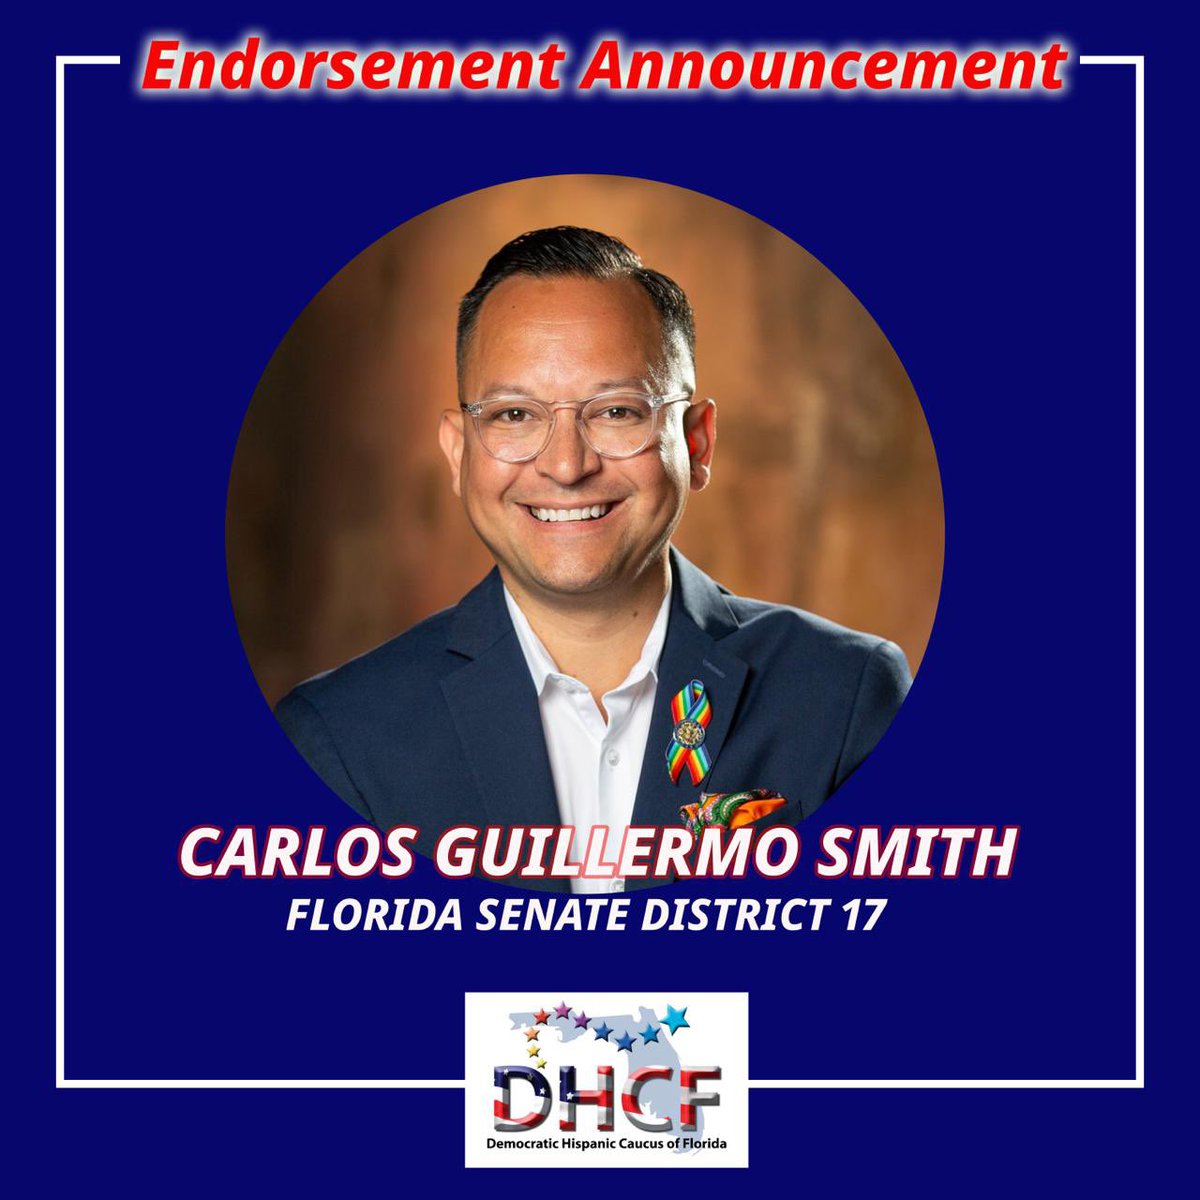 The DHCF proudly announces its endorsement of @CarlosGSmith running for Florida Senate District 17. His priorities align with our principles and values to attain fairness and equality in government for all Floridians. Visit his website for more info.👇🏻 carlosguillermosmith.com